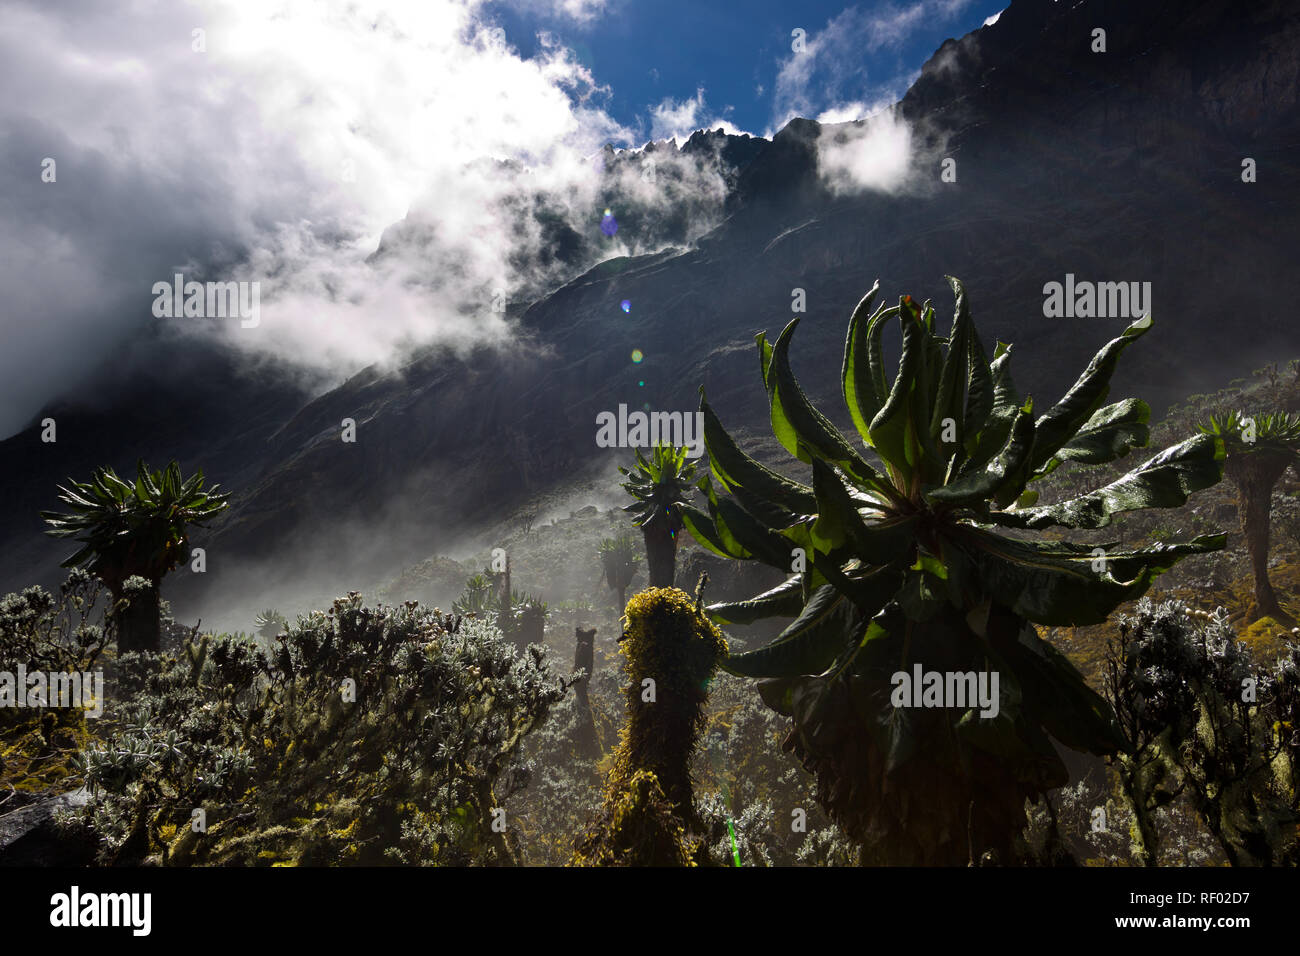 On day 6 of the Kilembe Route, after summiting Mount Stanley, hikers descend to lower elevaiton in Rwenzori National Park, Uganda past pretty scenery. Stock Photo